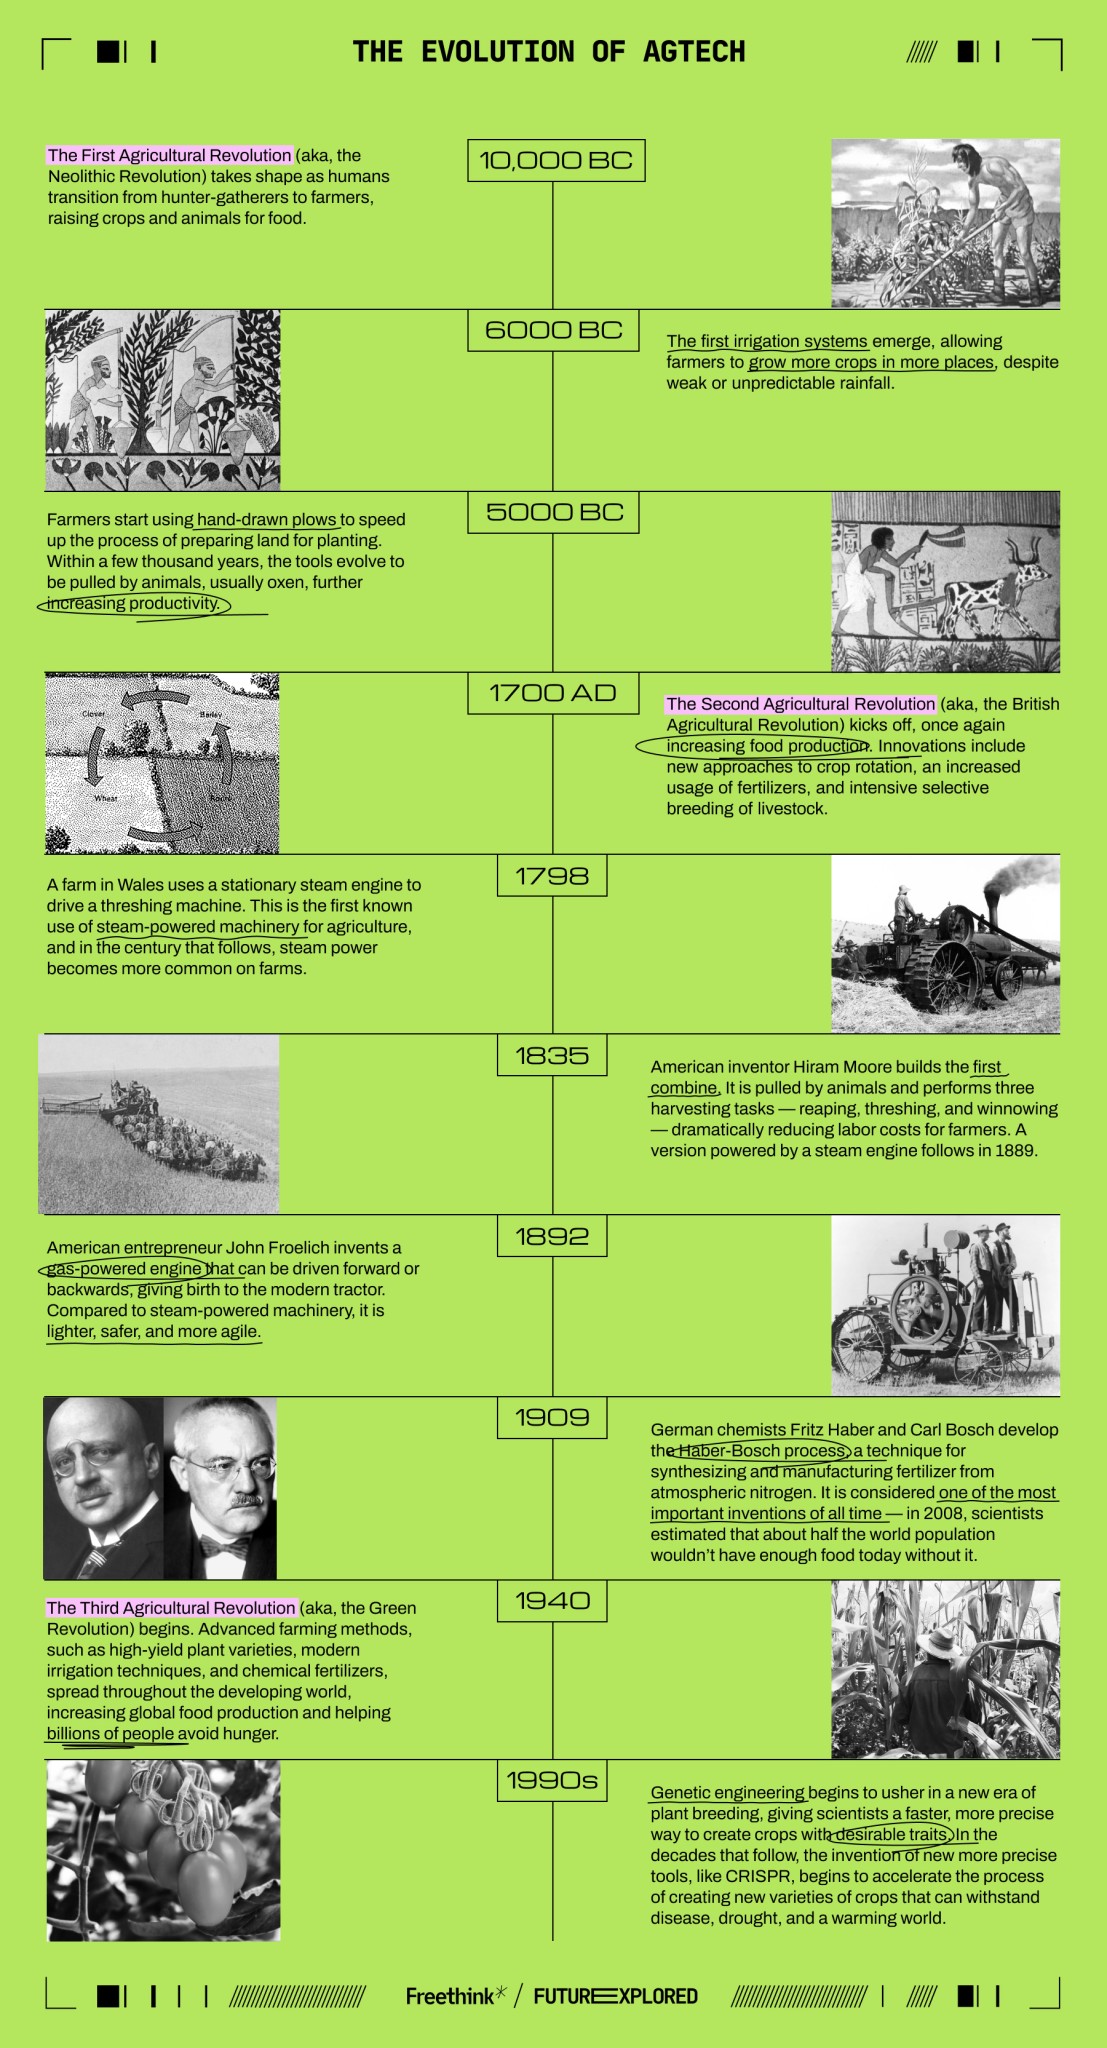 Timeline infographic depicting key milestones in agtech evolution from 10,000 BC to the 1990s, highlighting innovations such as plow and irrigation, stationary steam engine, mechanical reaper, and genetic engineering.